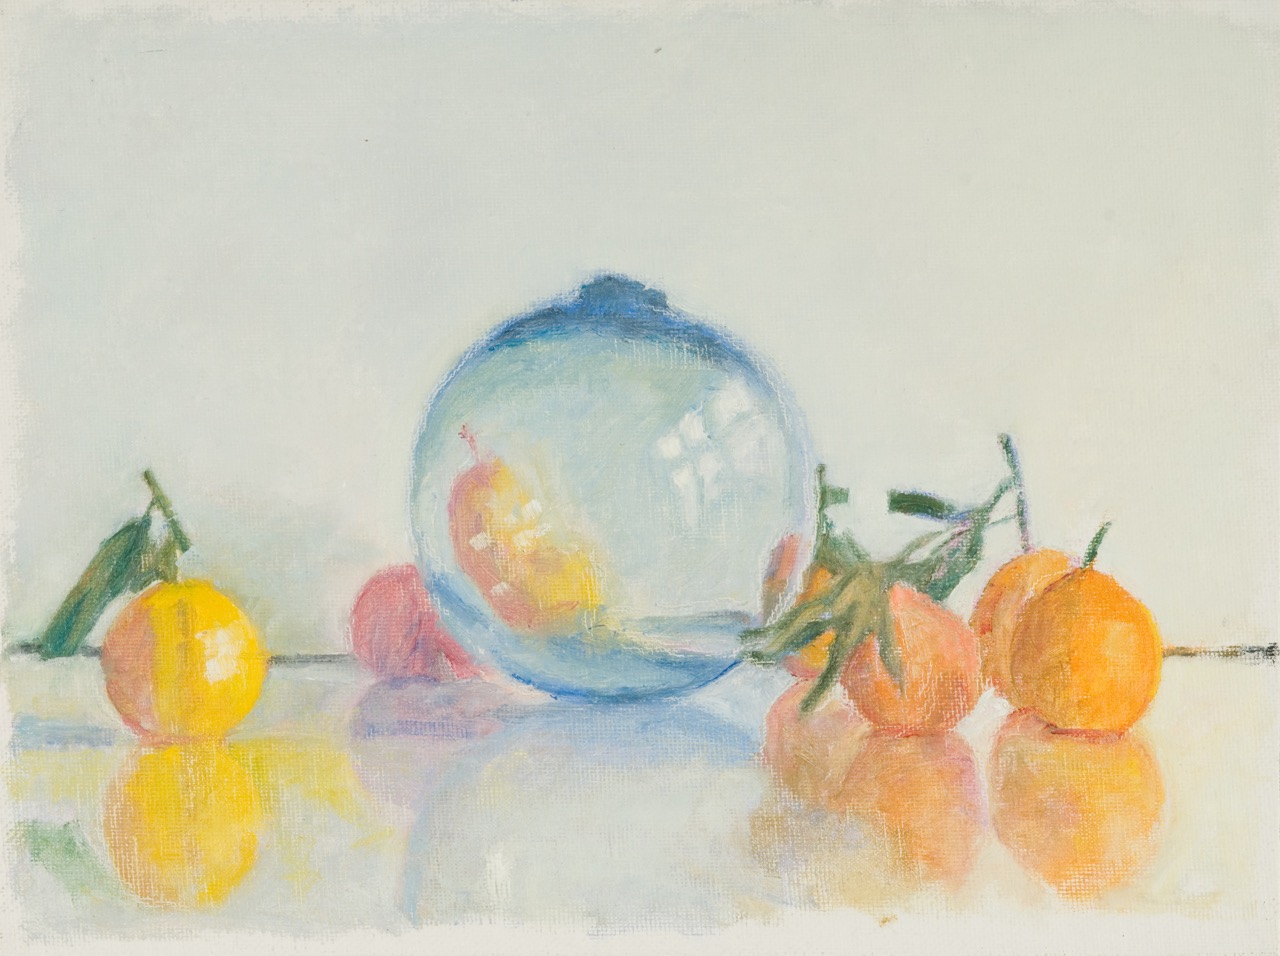 Katya's Bubble with Tangerines at Les Yeux du Monde Art Gallery